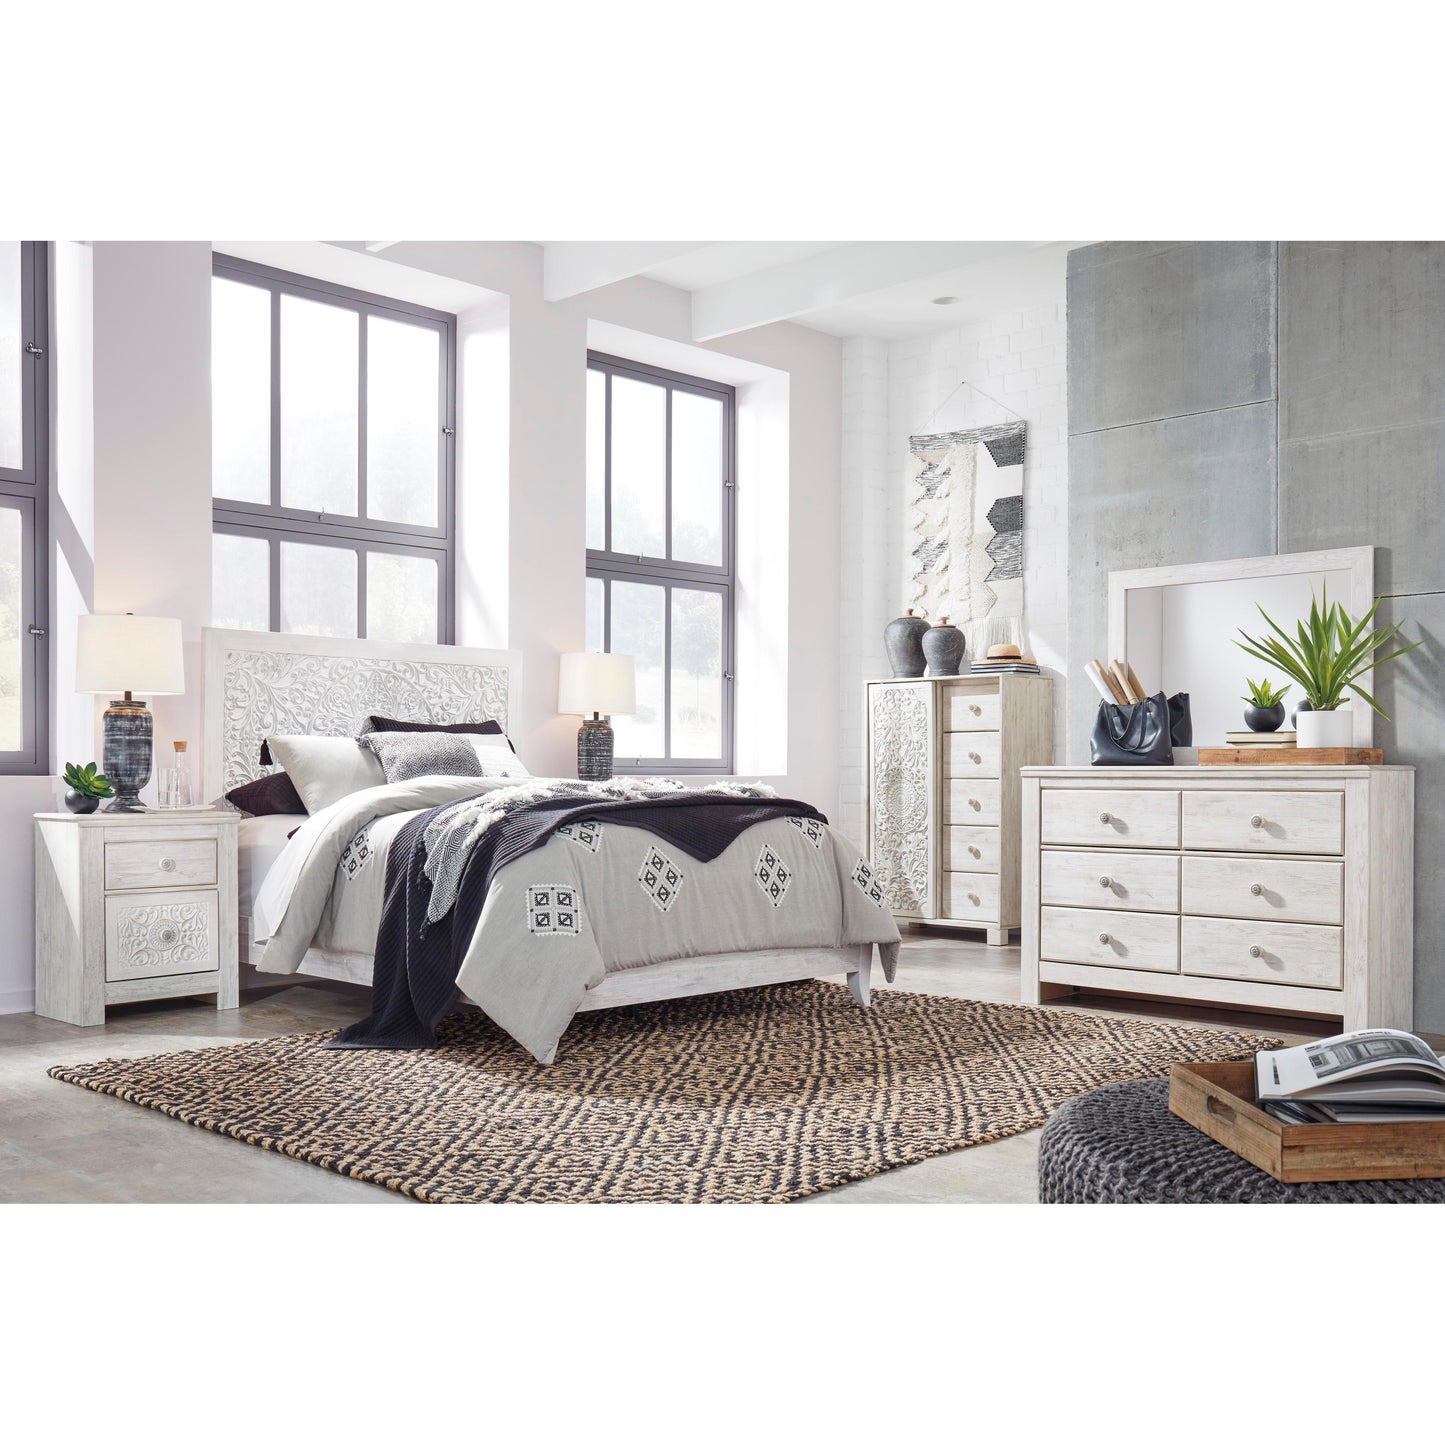 Signature Design by Ashley Paxberry B181B16 6 pc Queen Panel Bedroom Set IMAGE 1